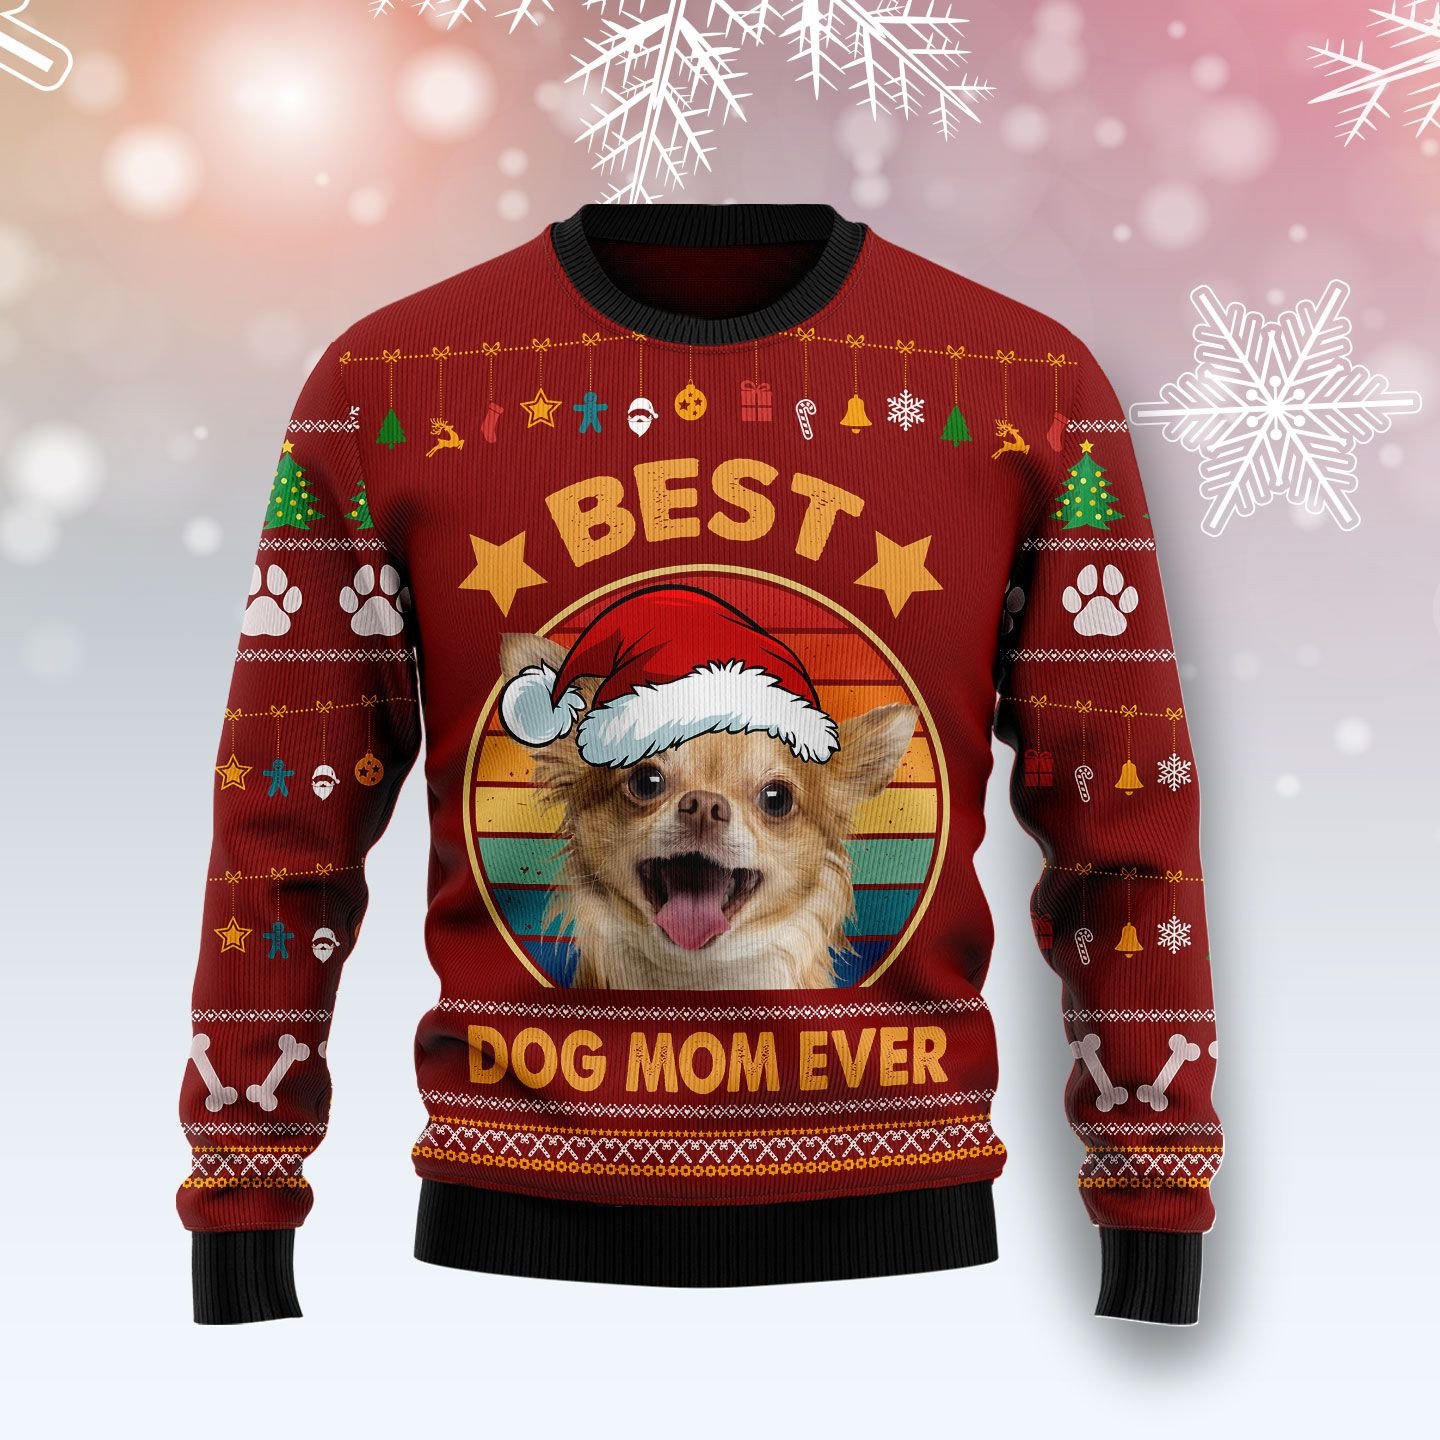 Chihuahua Best Dog Mom Ever Ugly Christmas Sweater Ugly Sweater For Men Women, Holiday Sweater